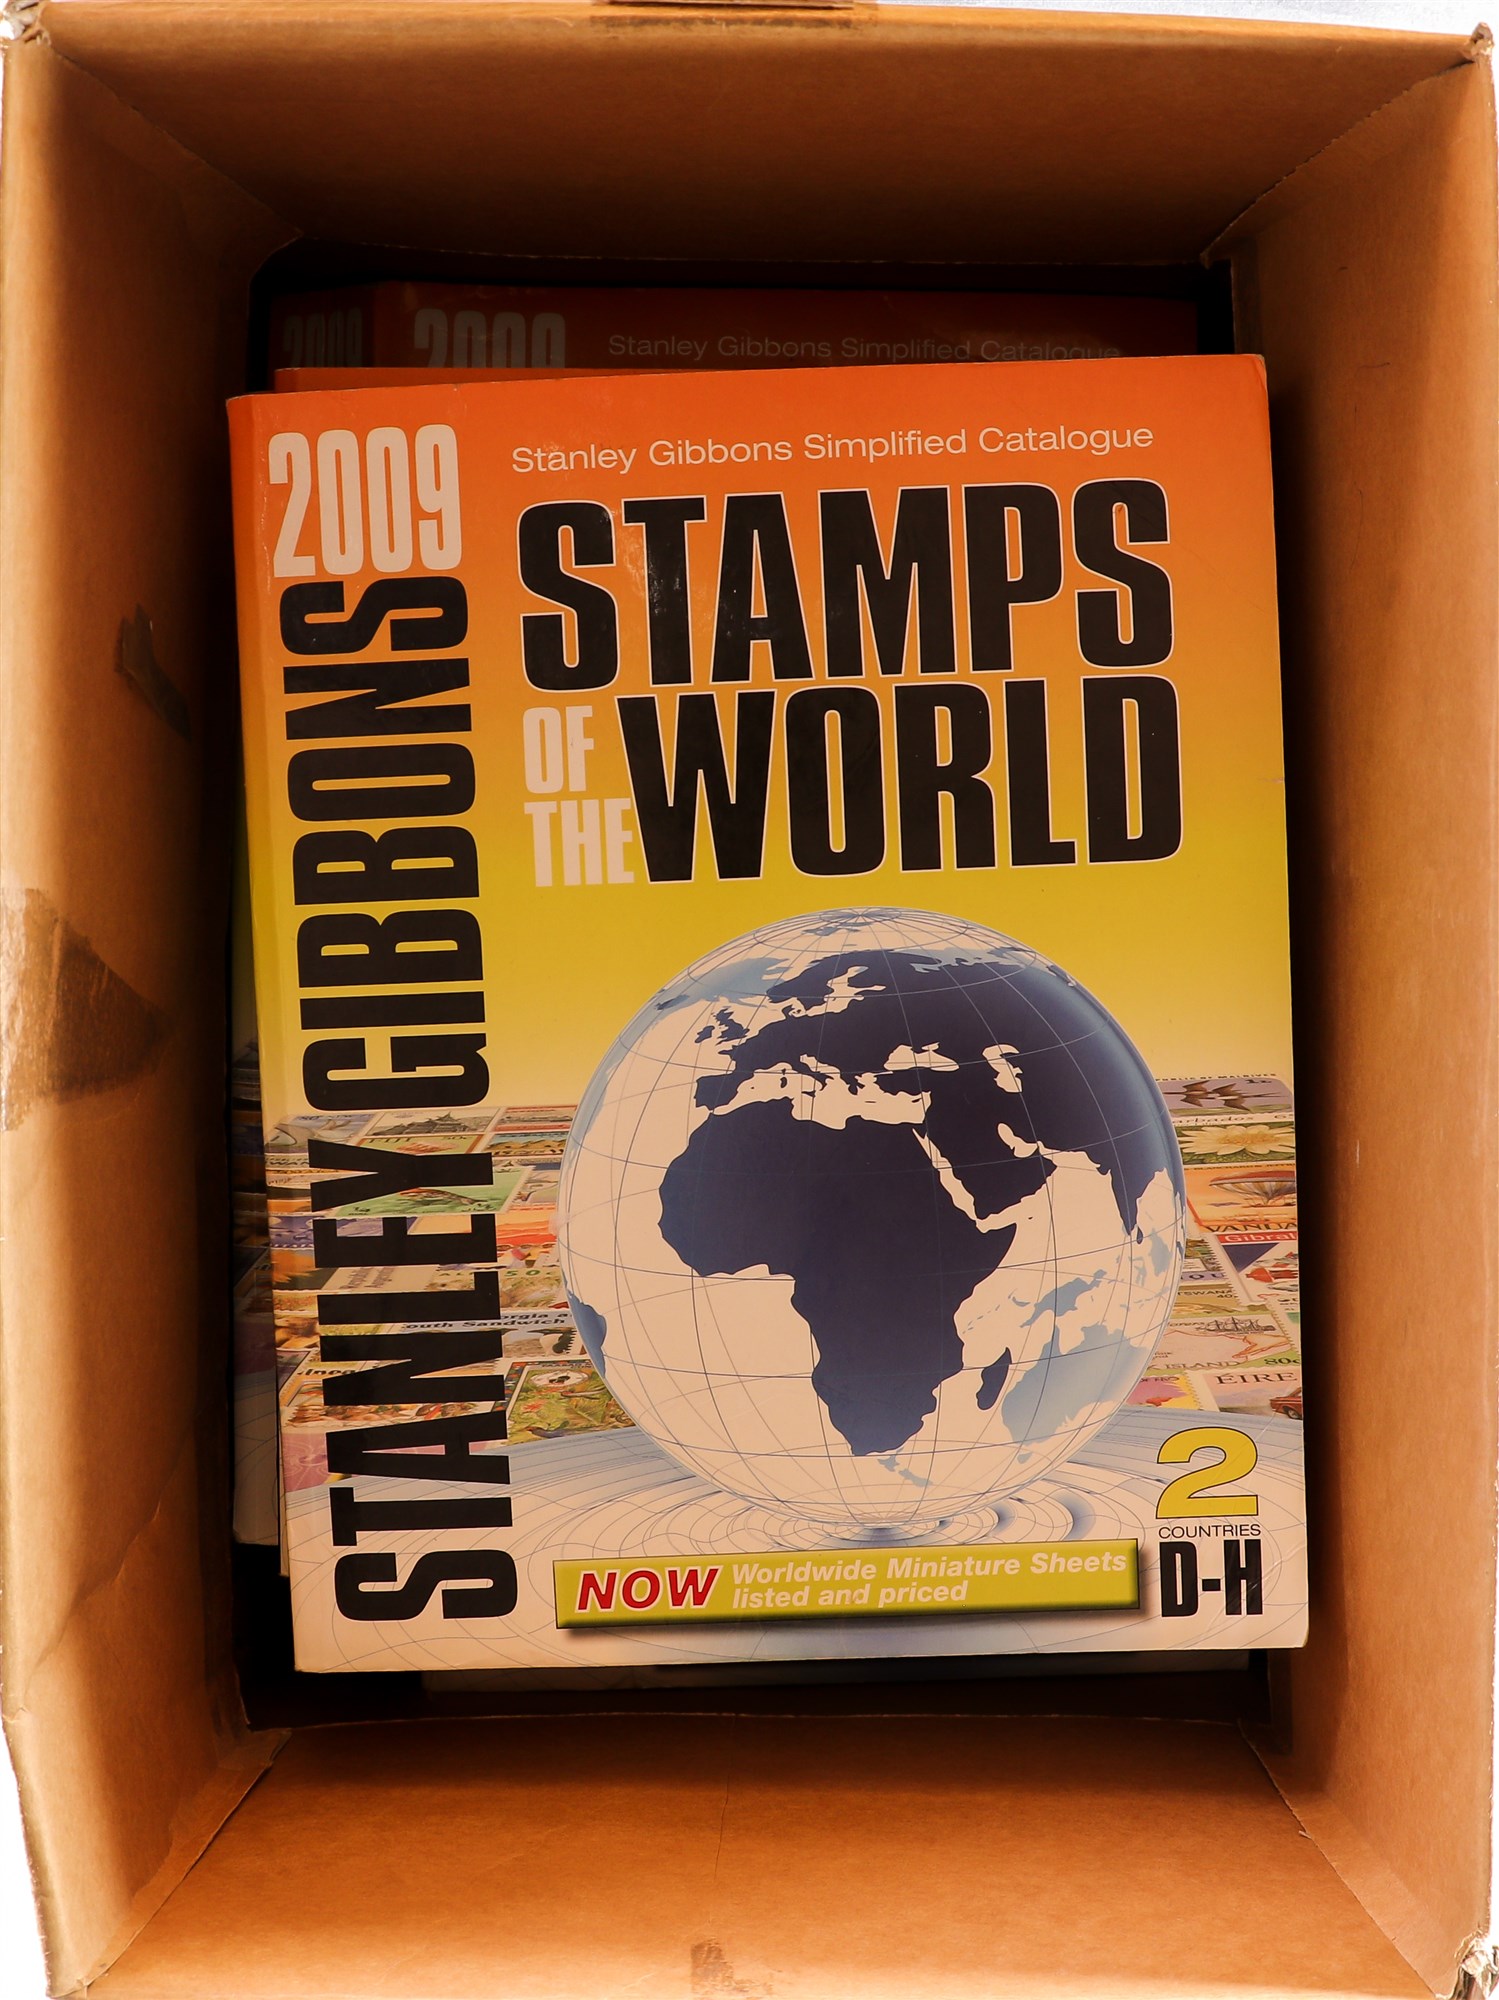 STAMPS OF THE WORLD 2009 complete set of SG catalogues, light use. Retail £224 (5 volumes)